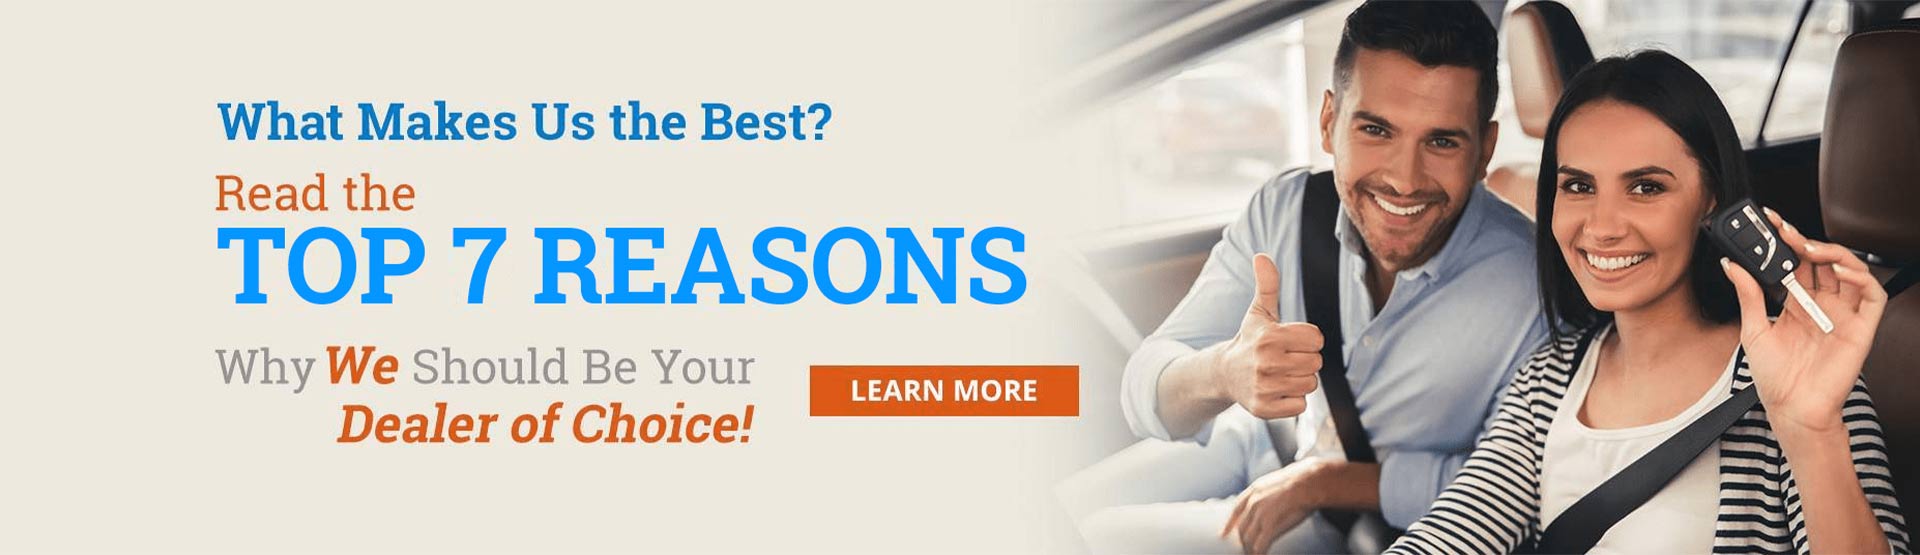 Top 7 Reasons to Shop with Deal Time Cars & Credit